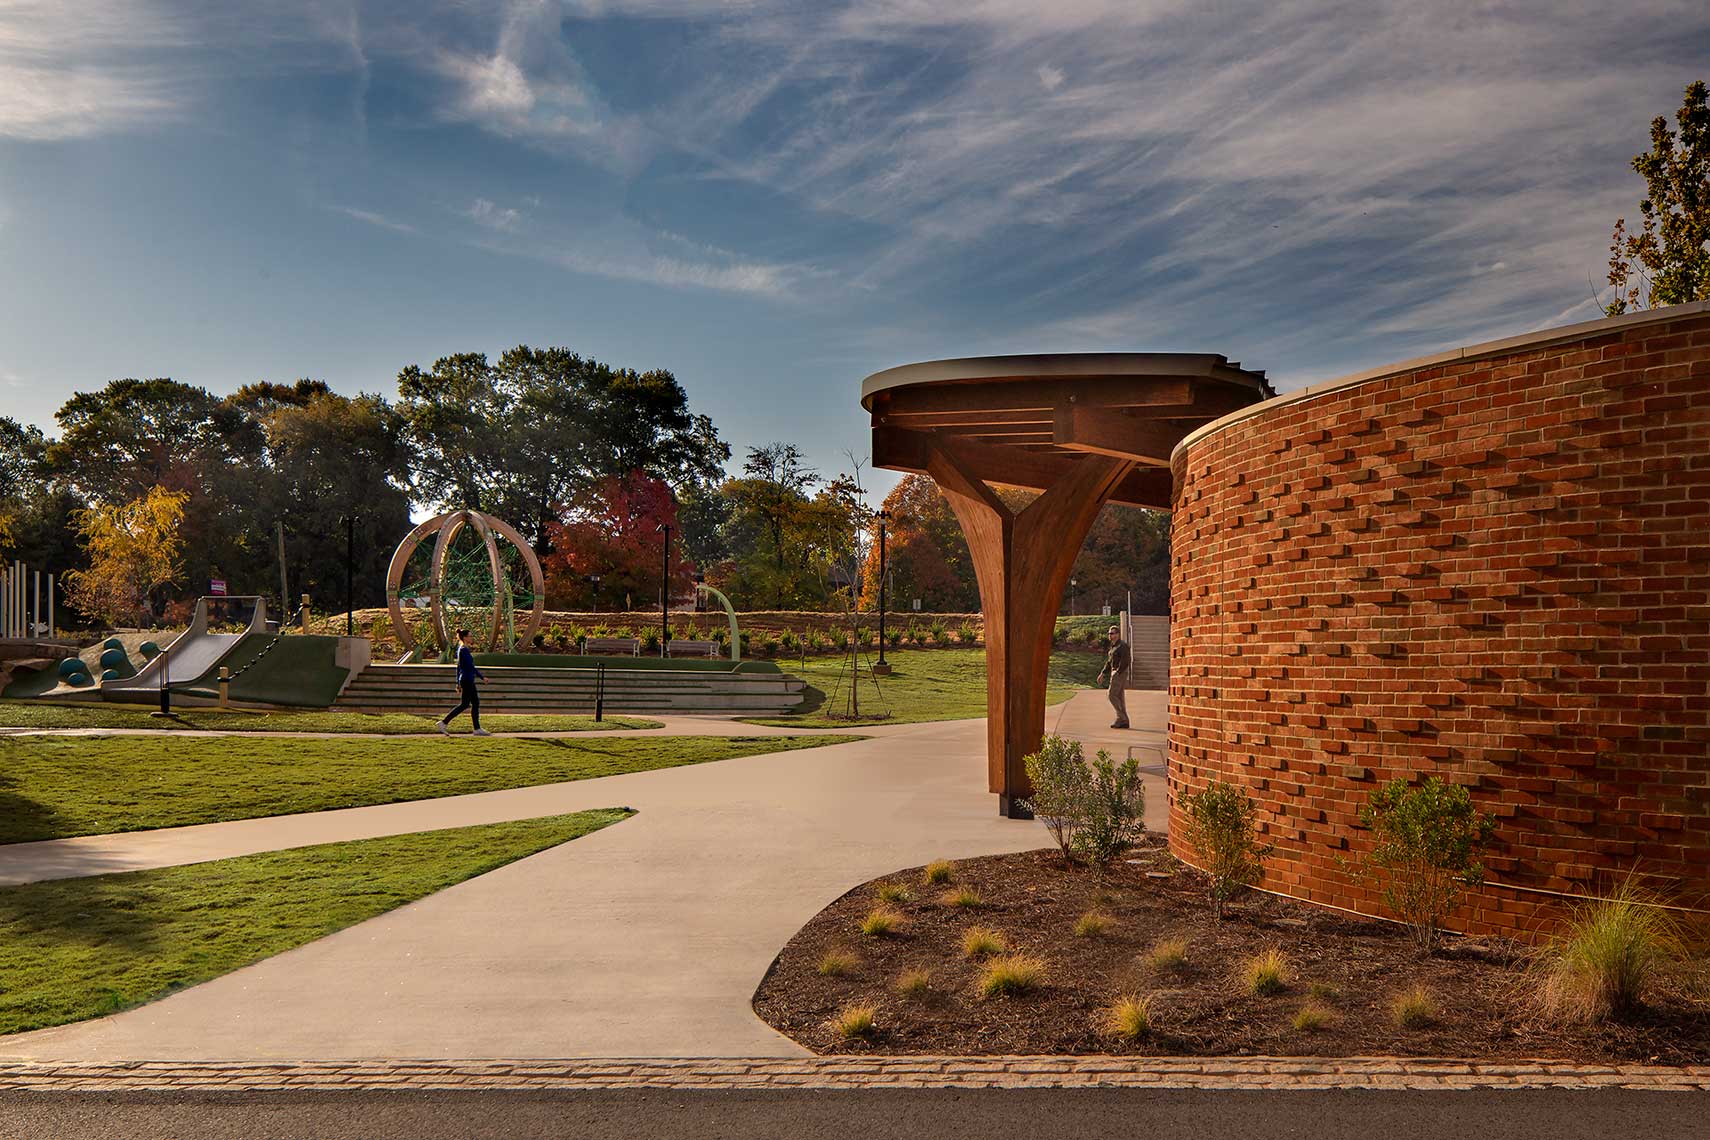 An early-morning view of patrons enjoying the pathways at the South Pavilion of Avondale Town Green